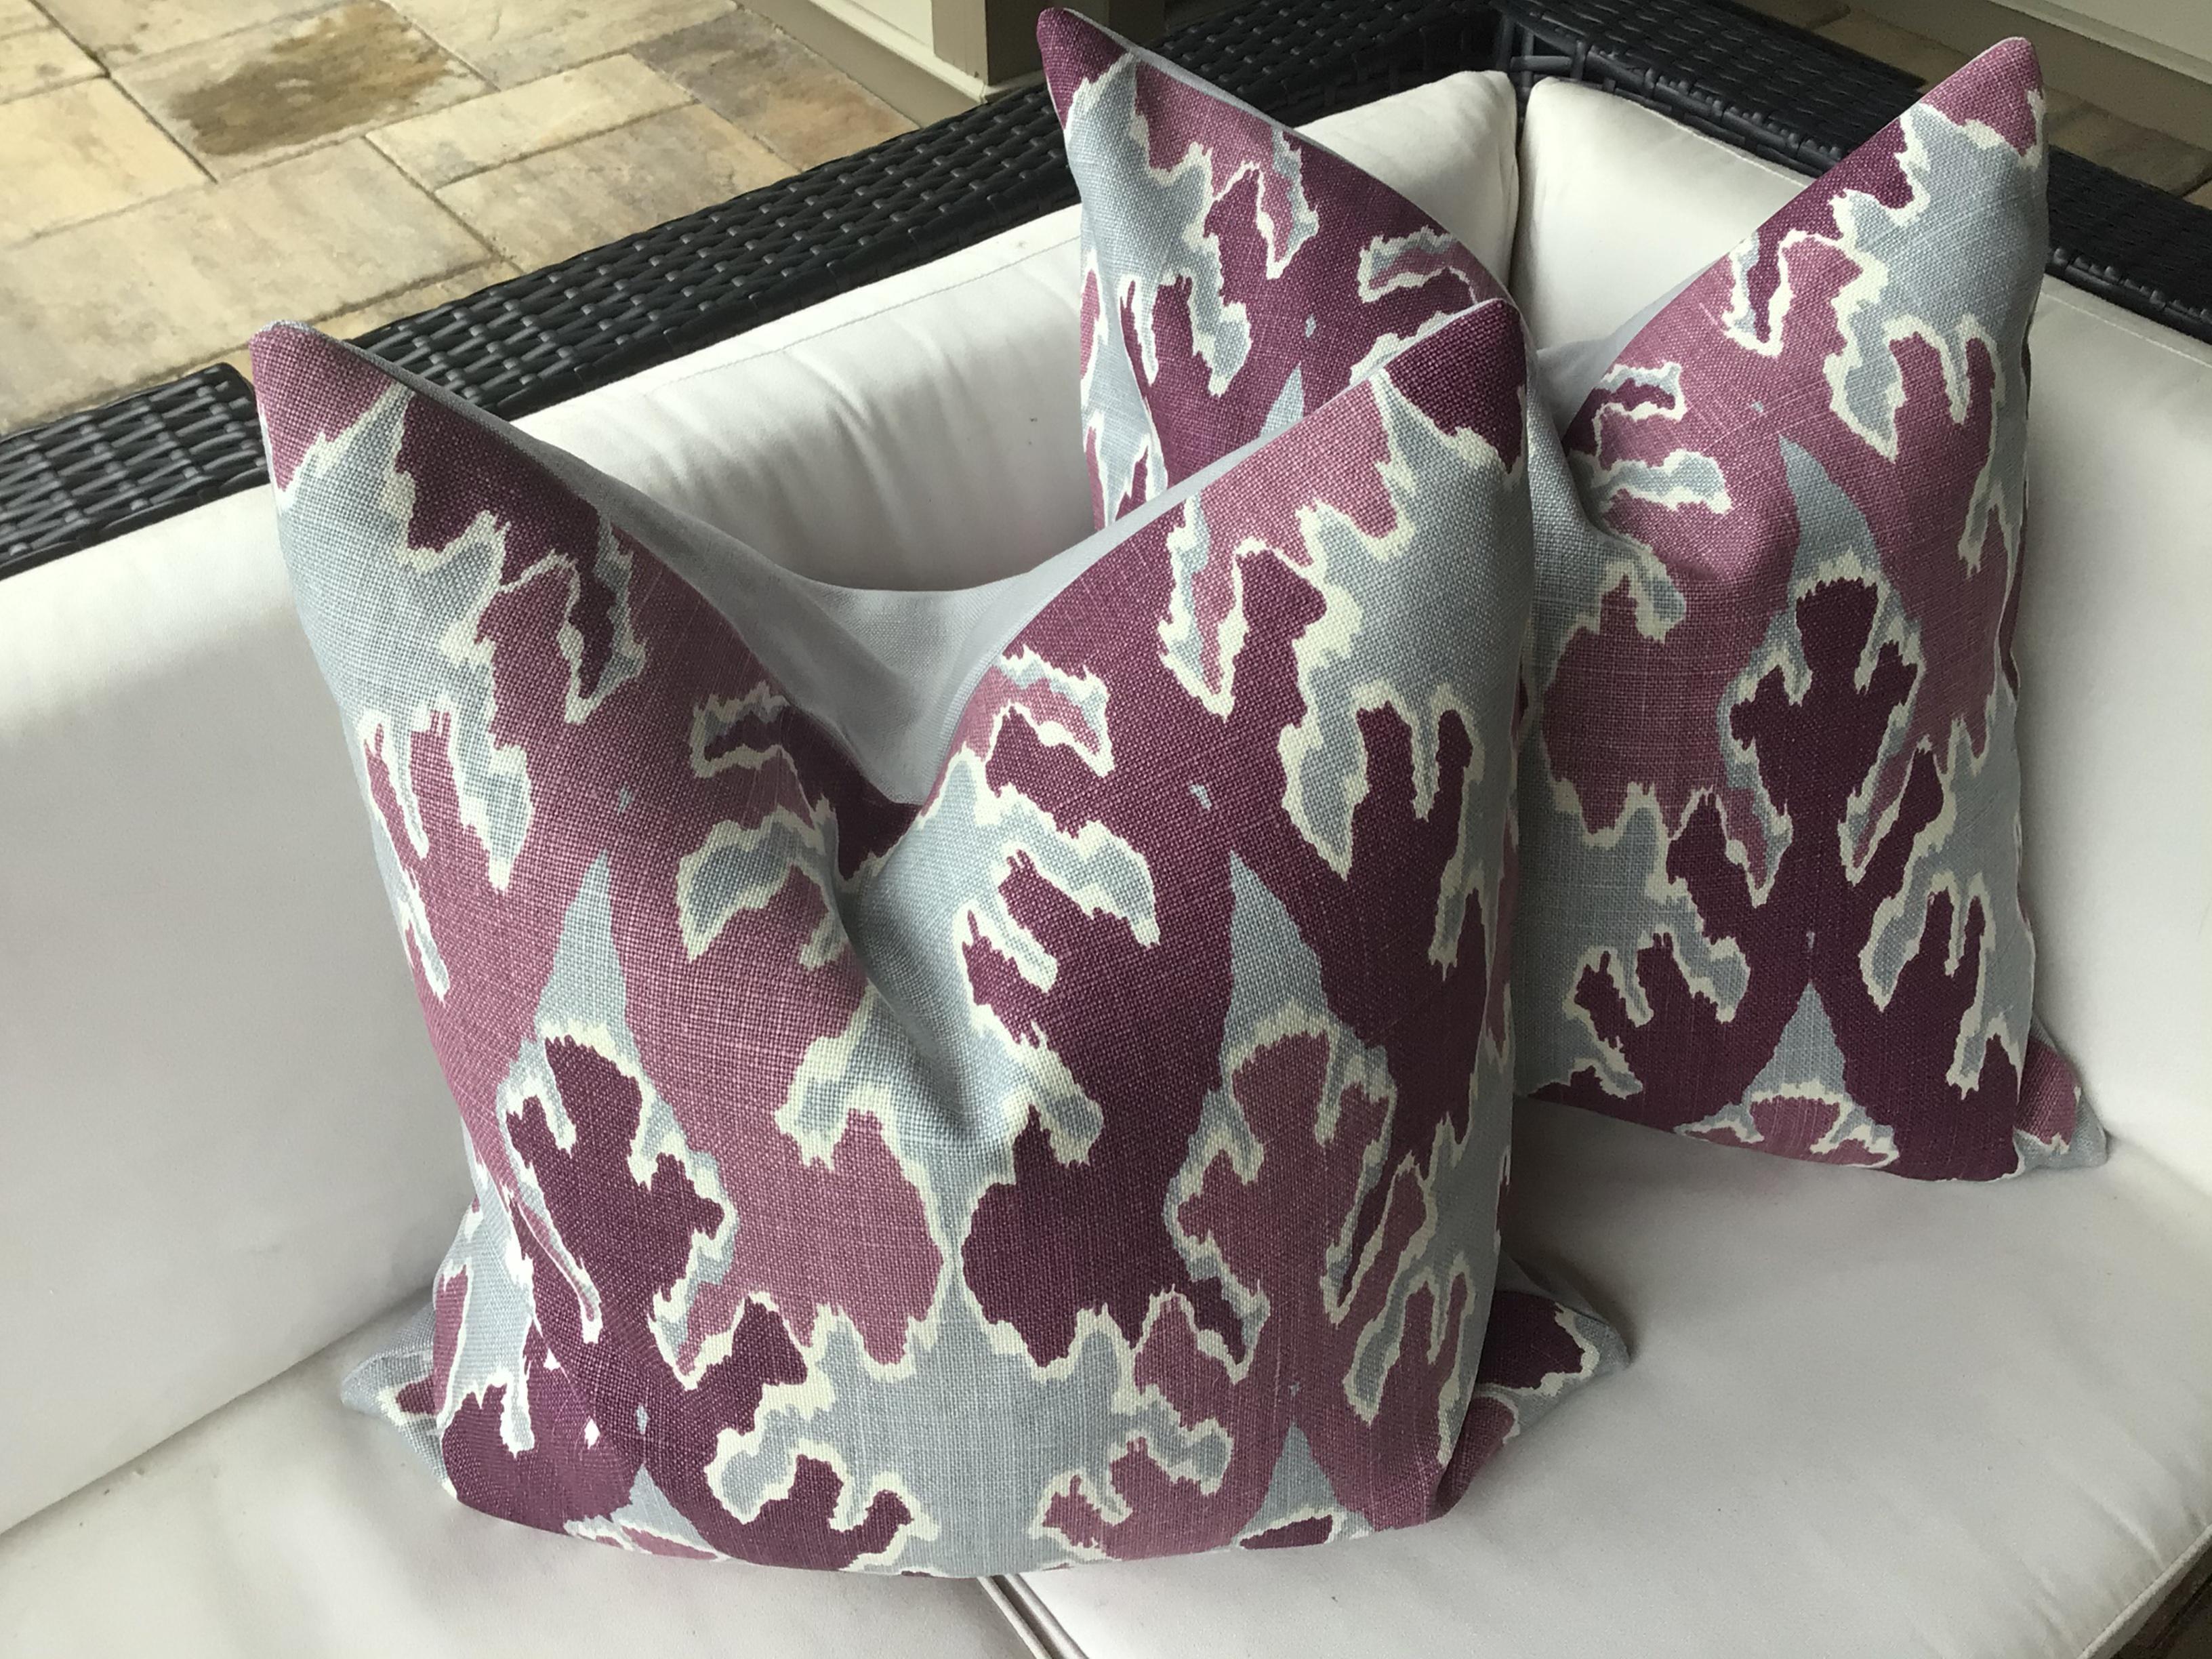 Contemporary Lee Jofa Bengal Bazaar Magenta and Gray Down Filled Pillows - a Pair For Sale